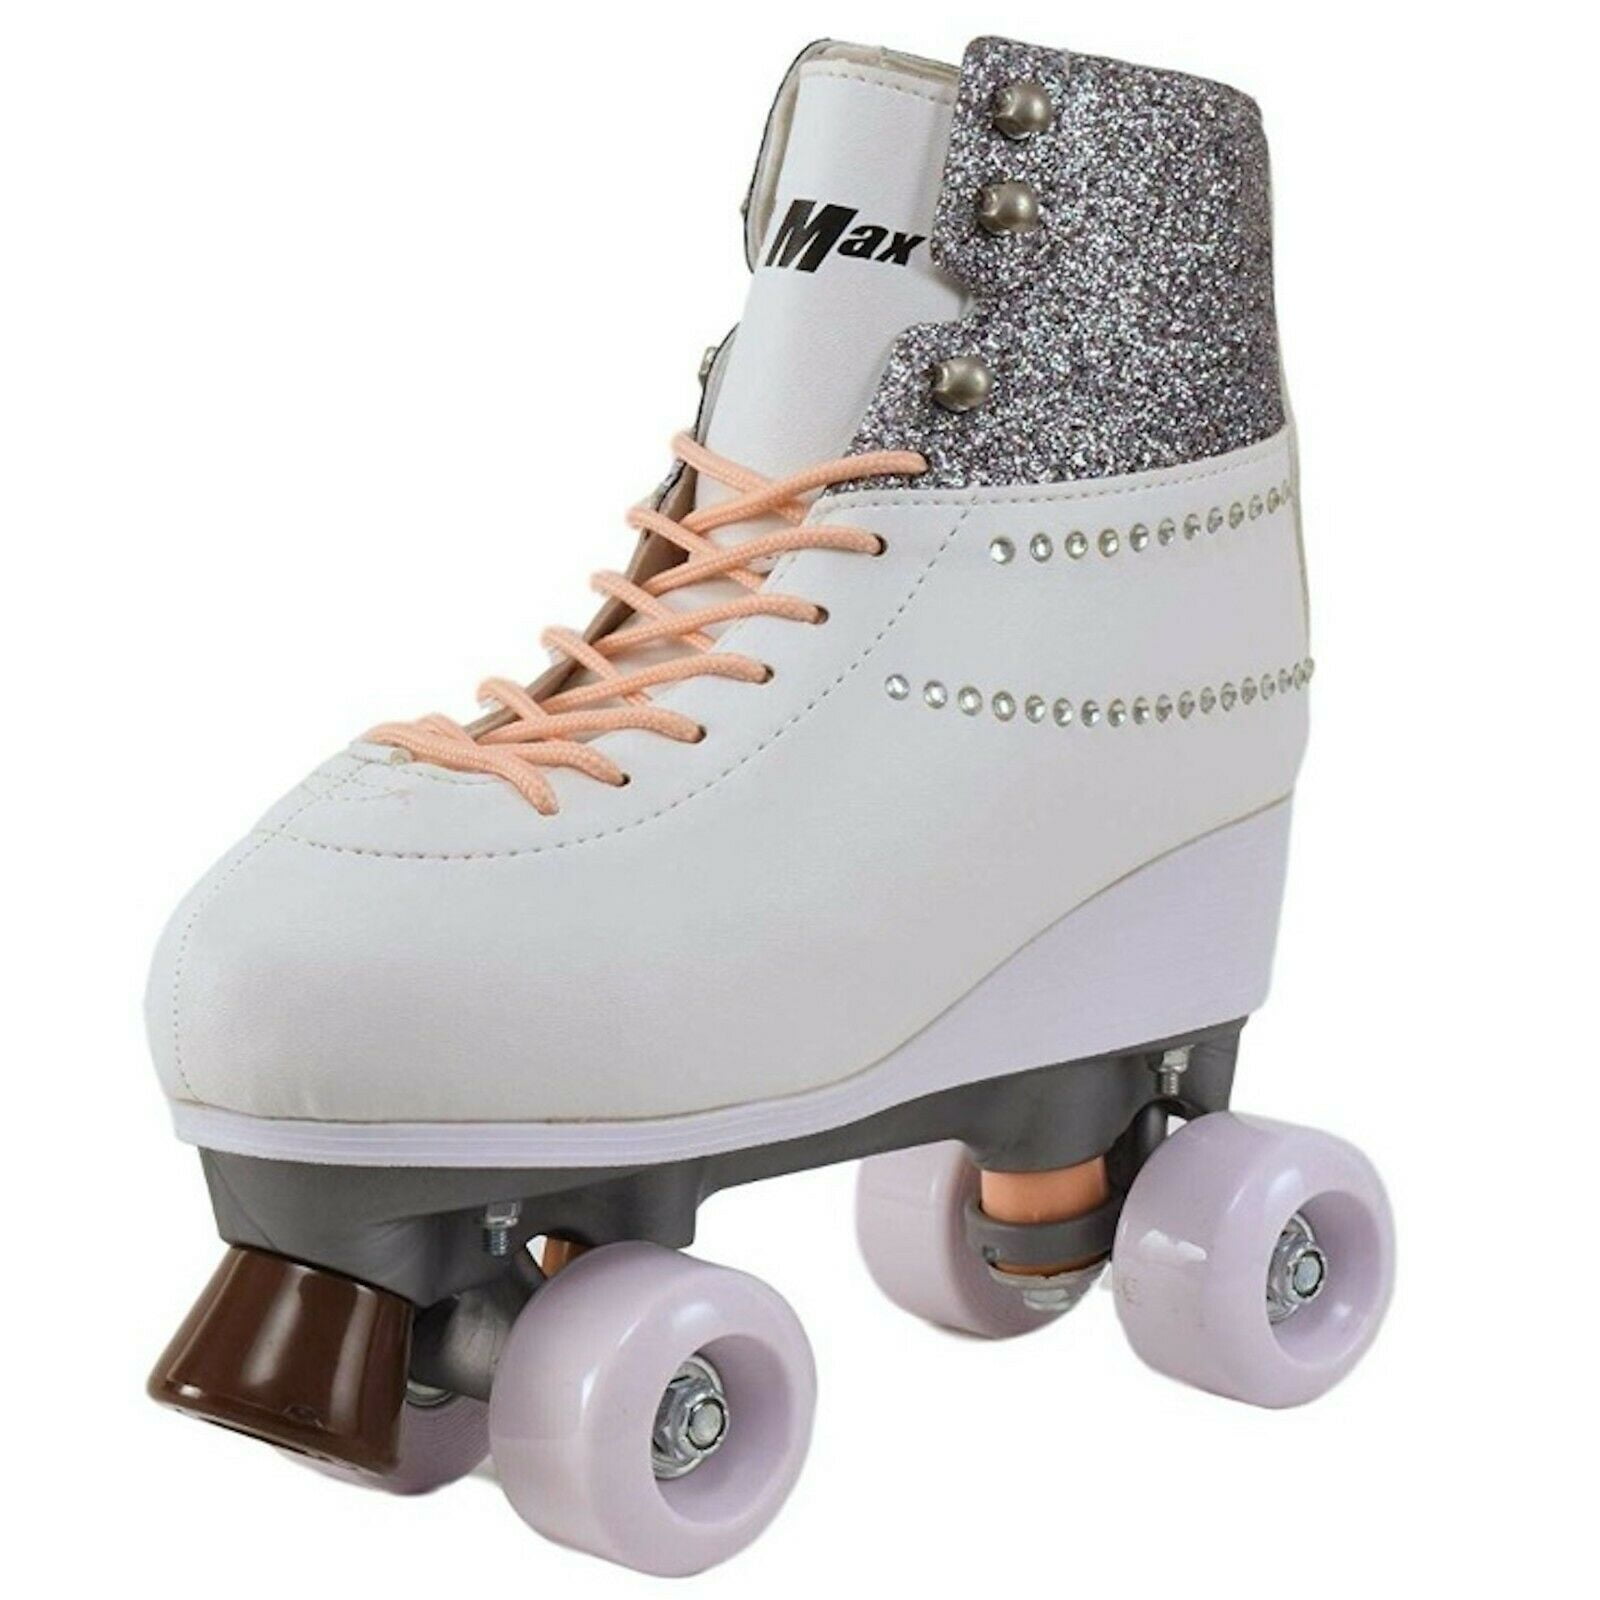 Quad Roller Skates for Girls and Women Size 2.5 Kids to 8.5 Women Outdoor Indoor 